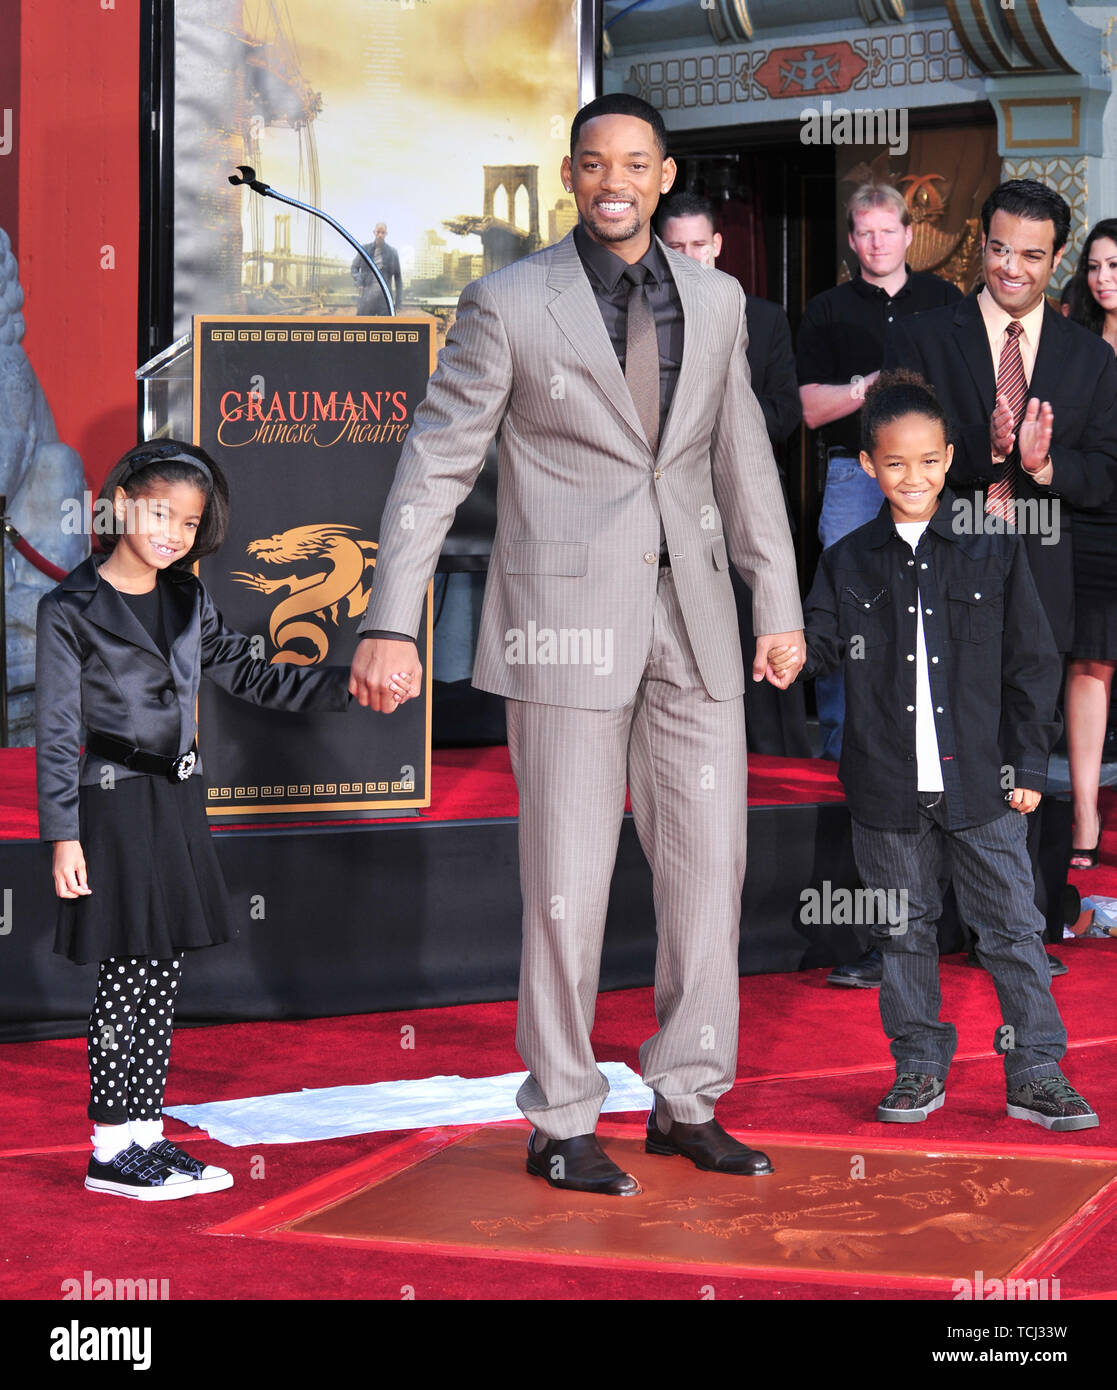 LOS ANGELES, CA. December 10, 2007: Will Smith & son Jaden Christopher Syre  Smith & daughter Willow Camille Reign Smith at Grauman's Chinese Theatre,  Hollywood, where he was honored by having his